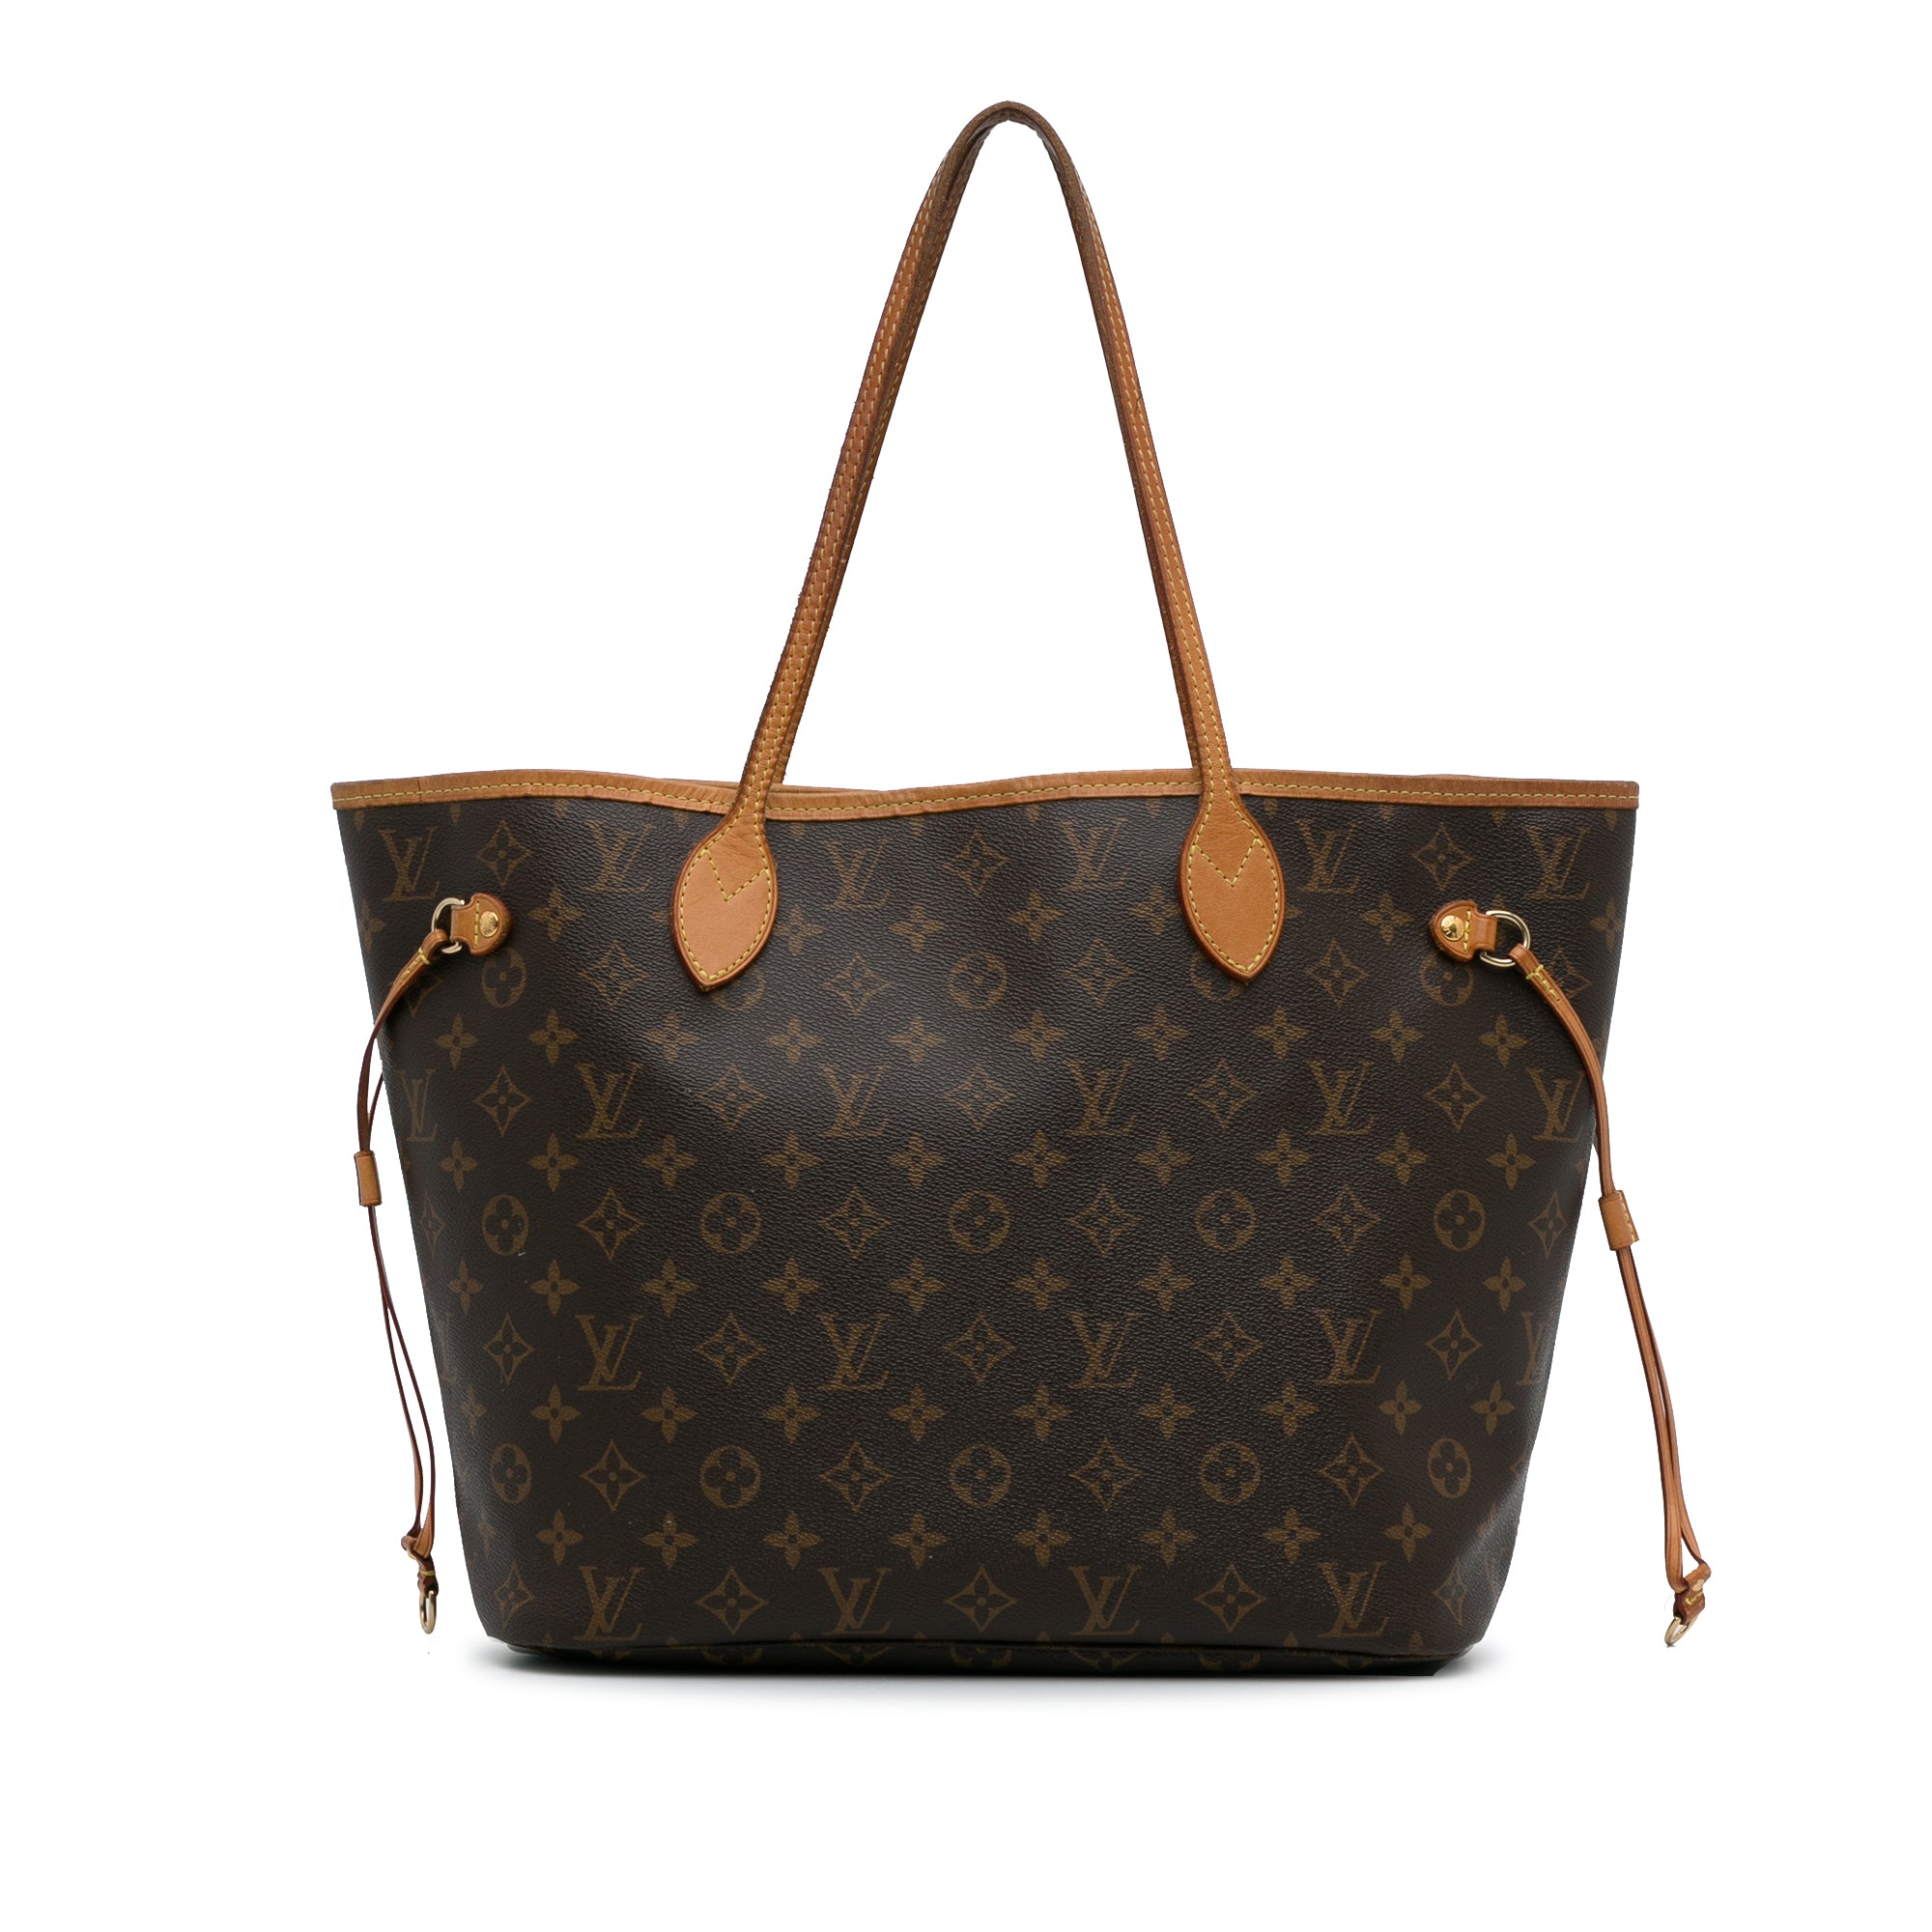 Tote Bag Organizer For Louis Vuitton Neverfull MM Bag with Zipper Side  Pocket